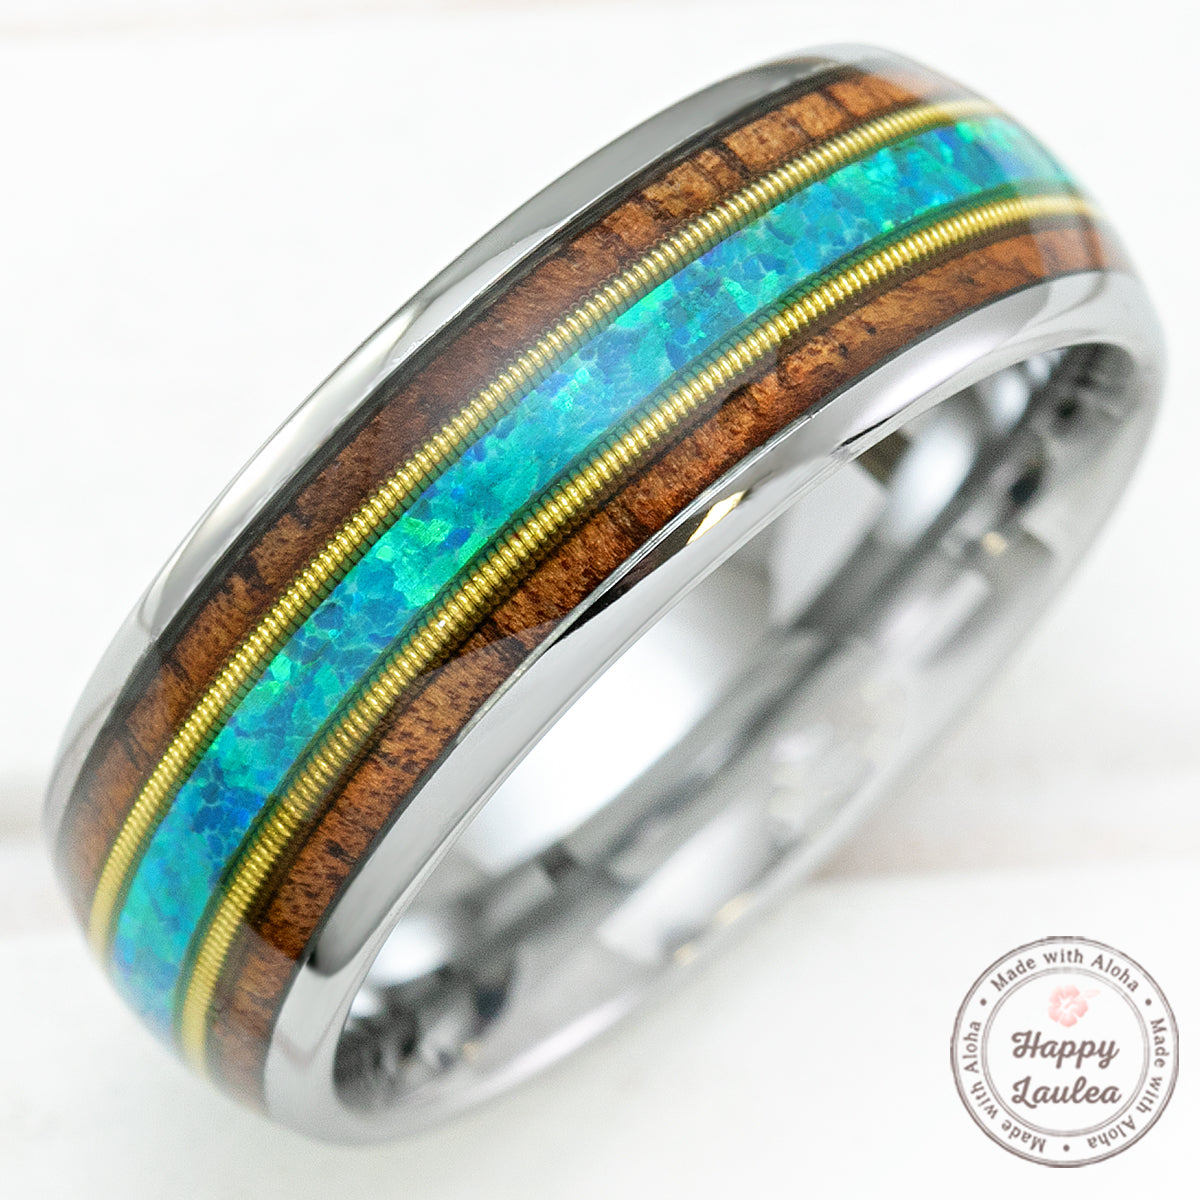 Tungsten Carbide 8mm Ring with Guitar String, Blue Opal, & Koa Wood - Dome Shape, Comfort Fitment